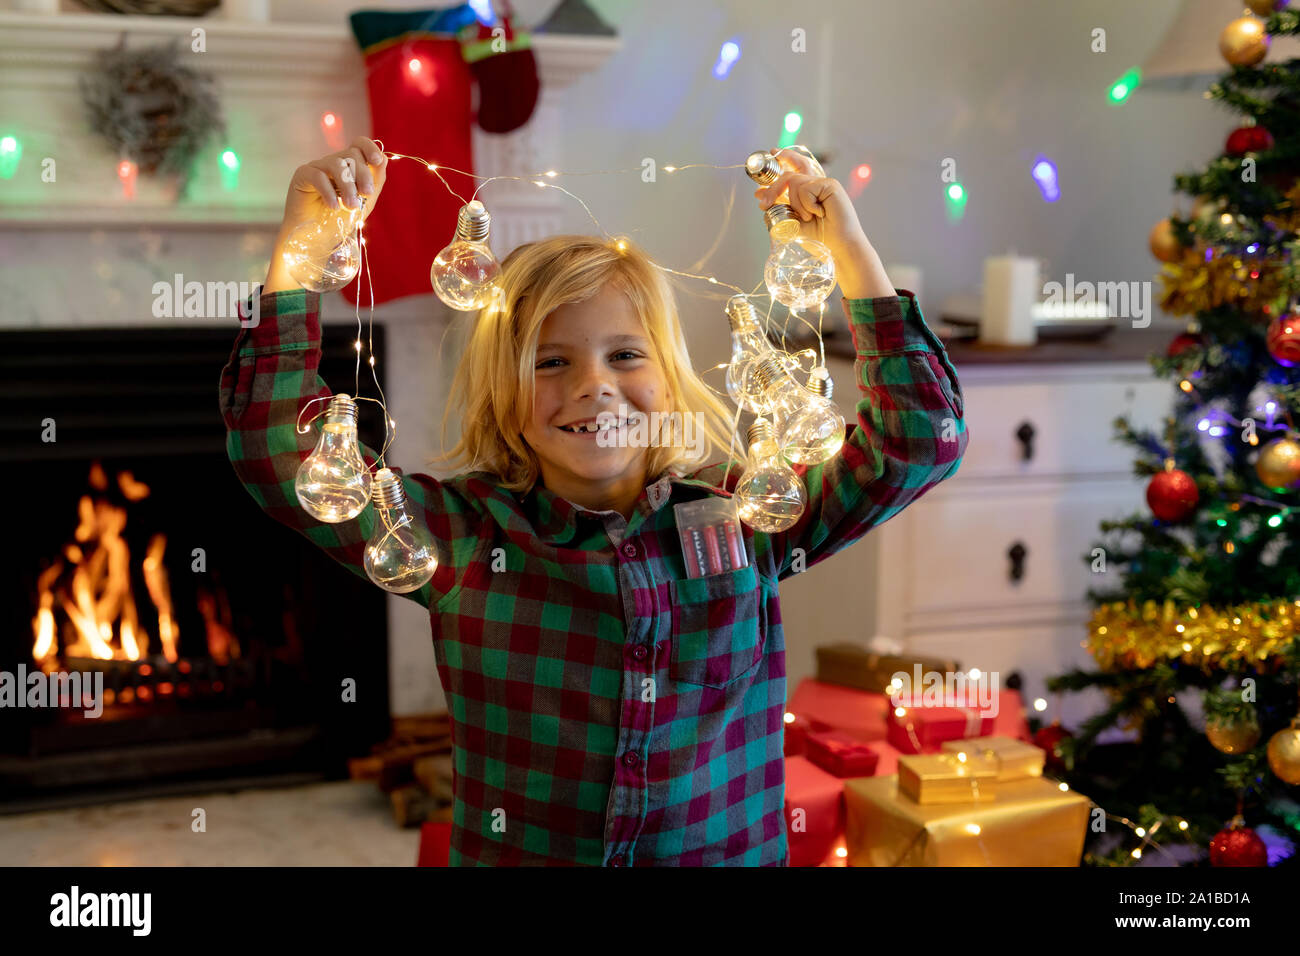 Boy at home at Christmas time Stock Photo